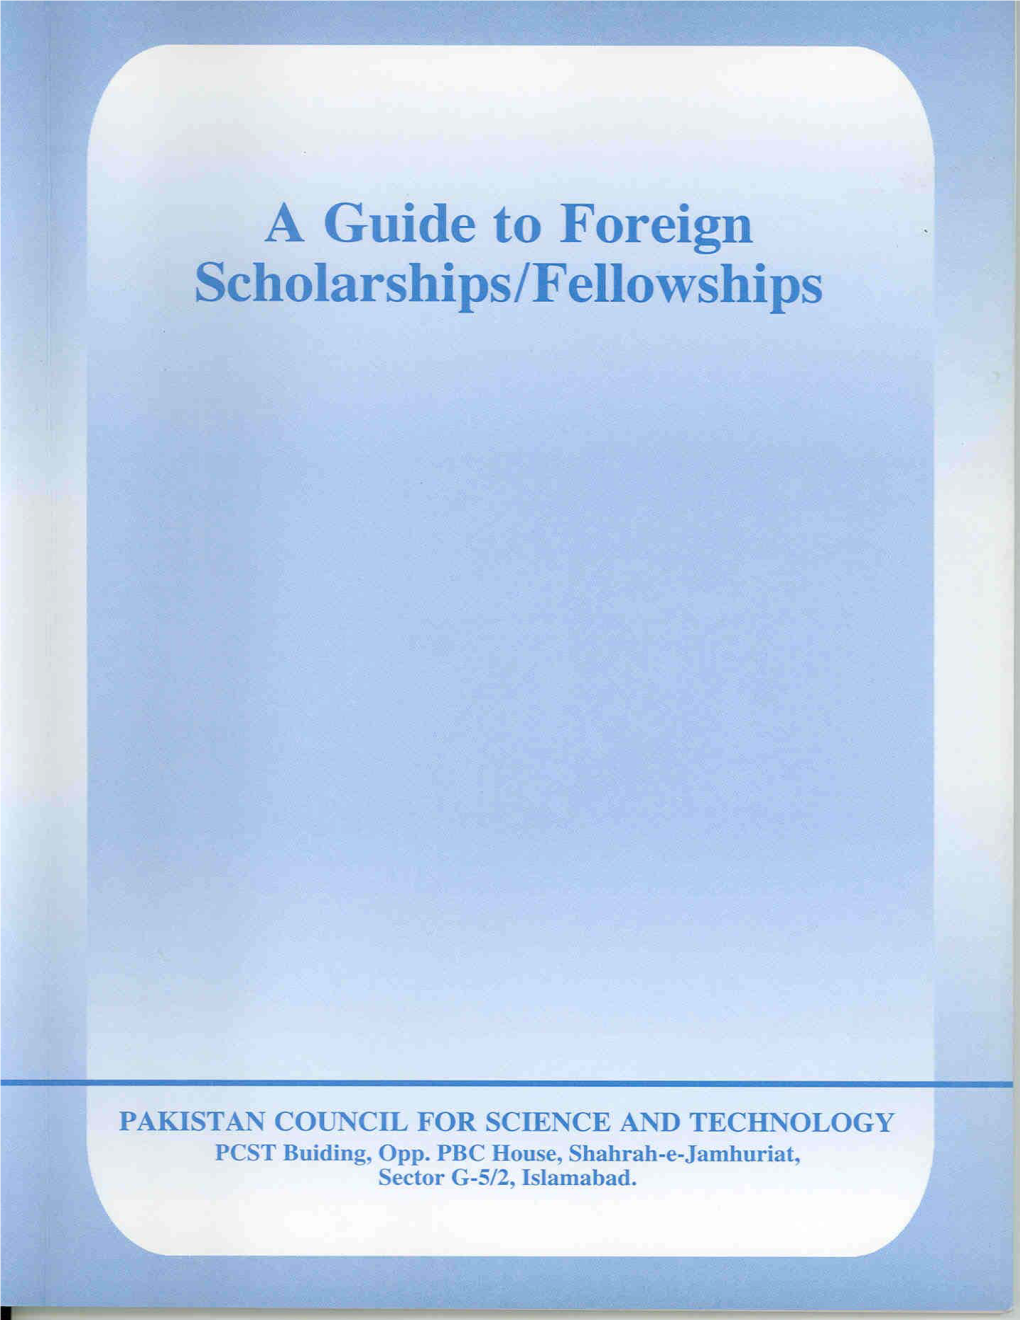 A Guide to Foreign Scholarships / Fellowships